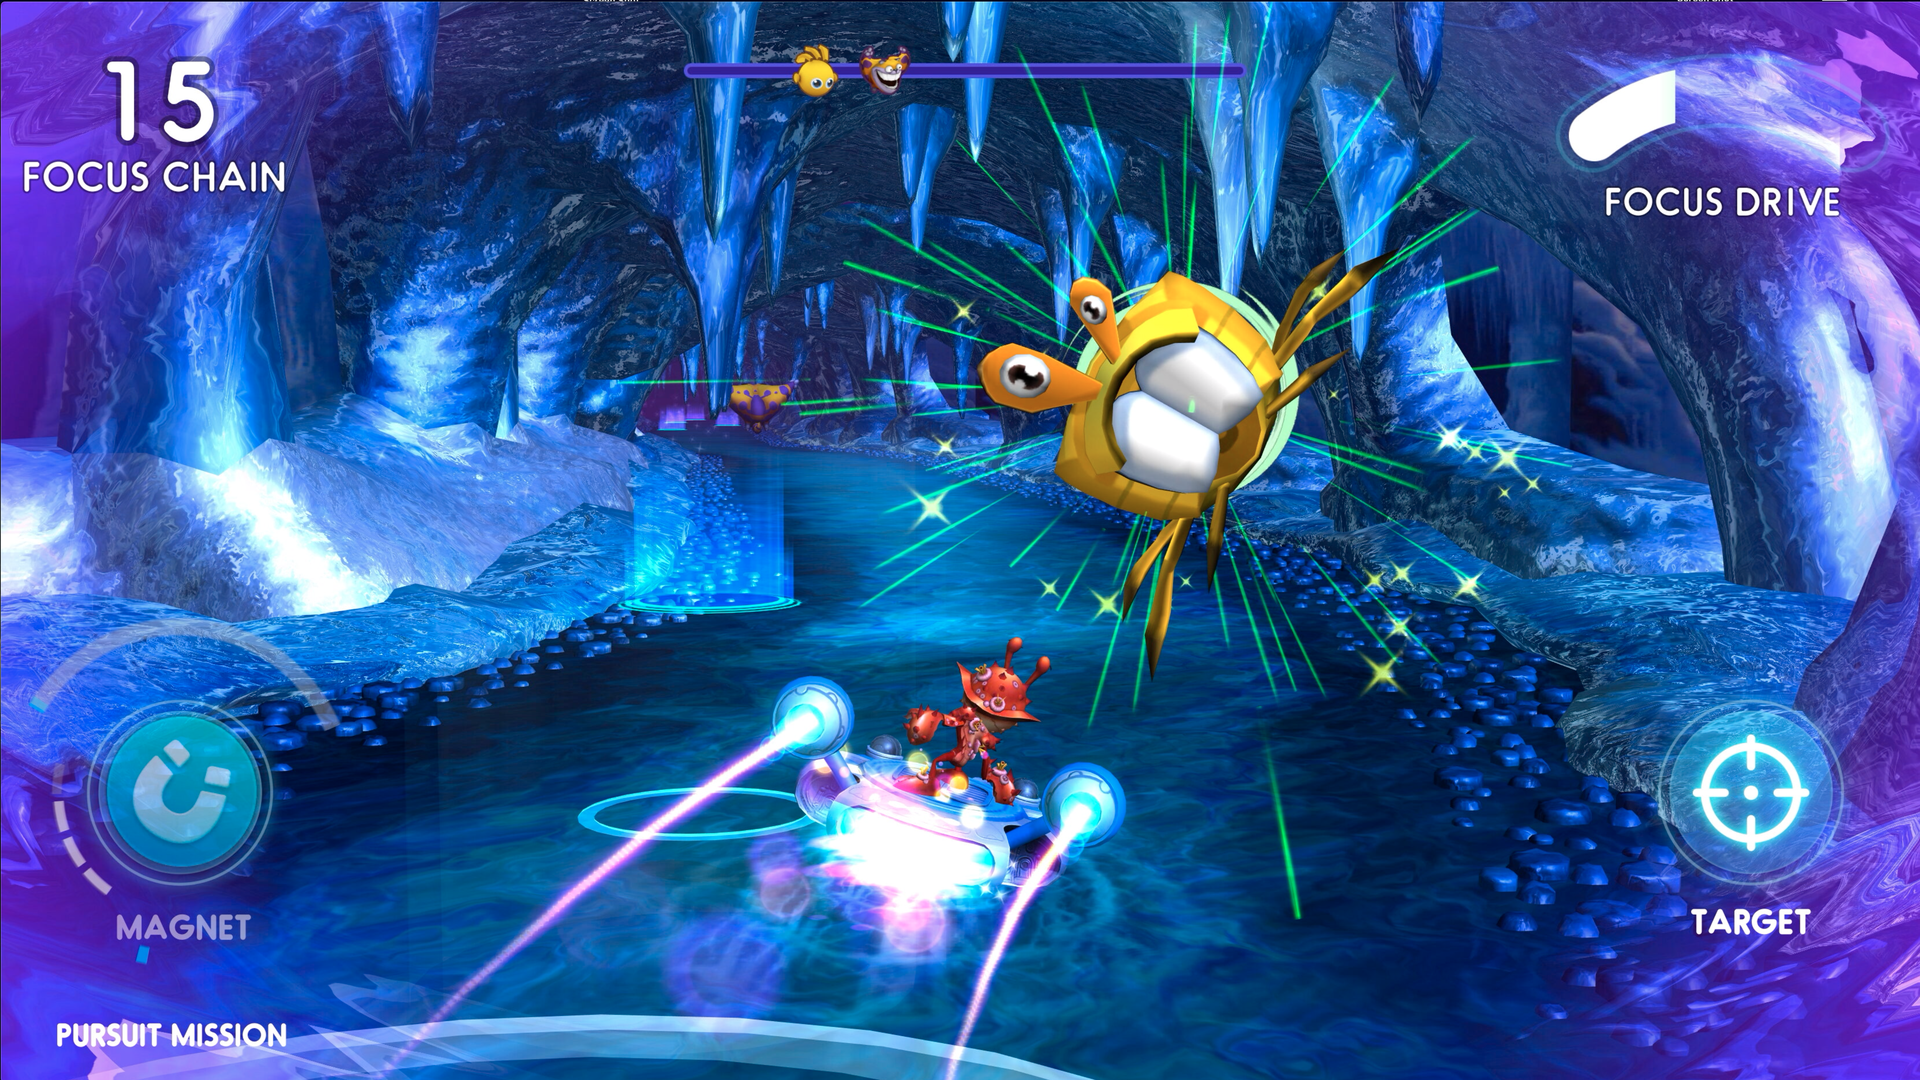 Video game screenshot of a small humanoid character in a red outfit riding a futuristic skateboard